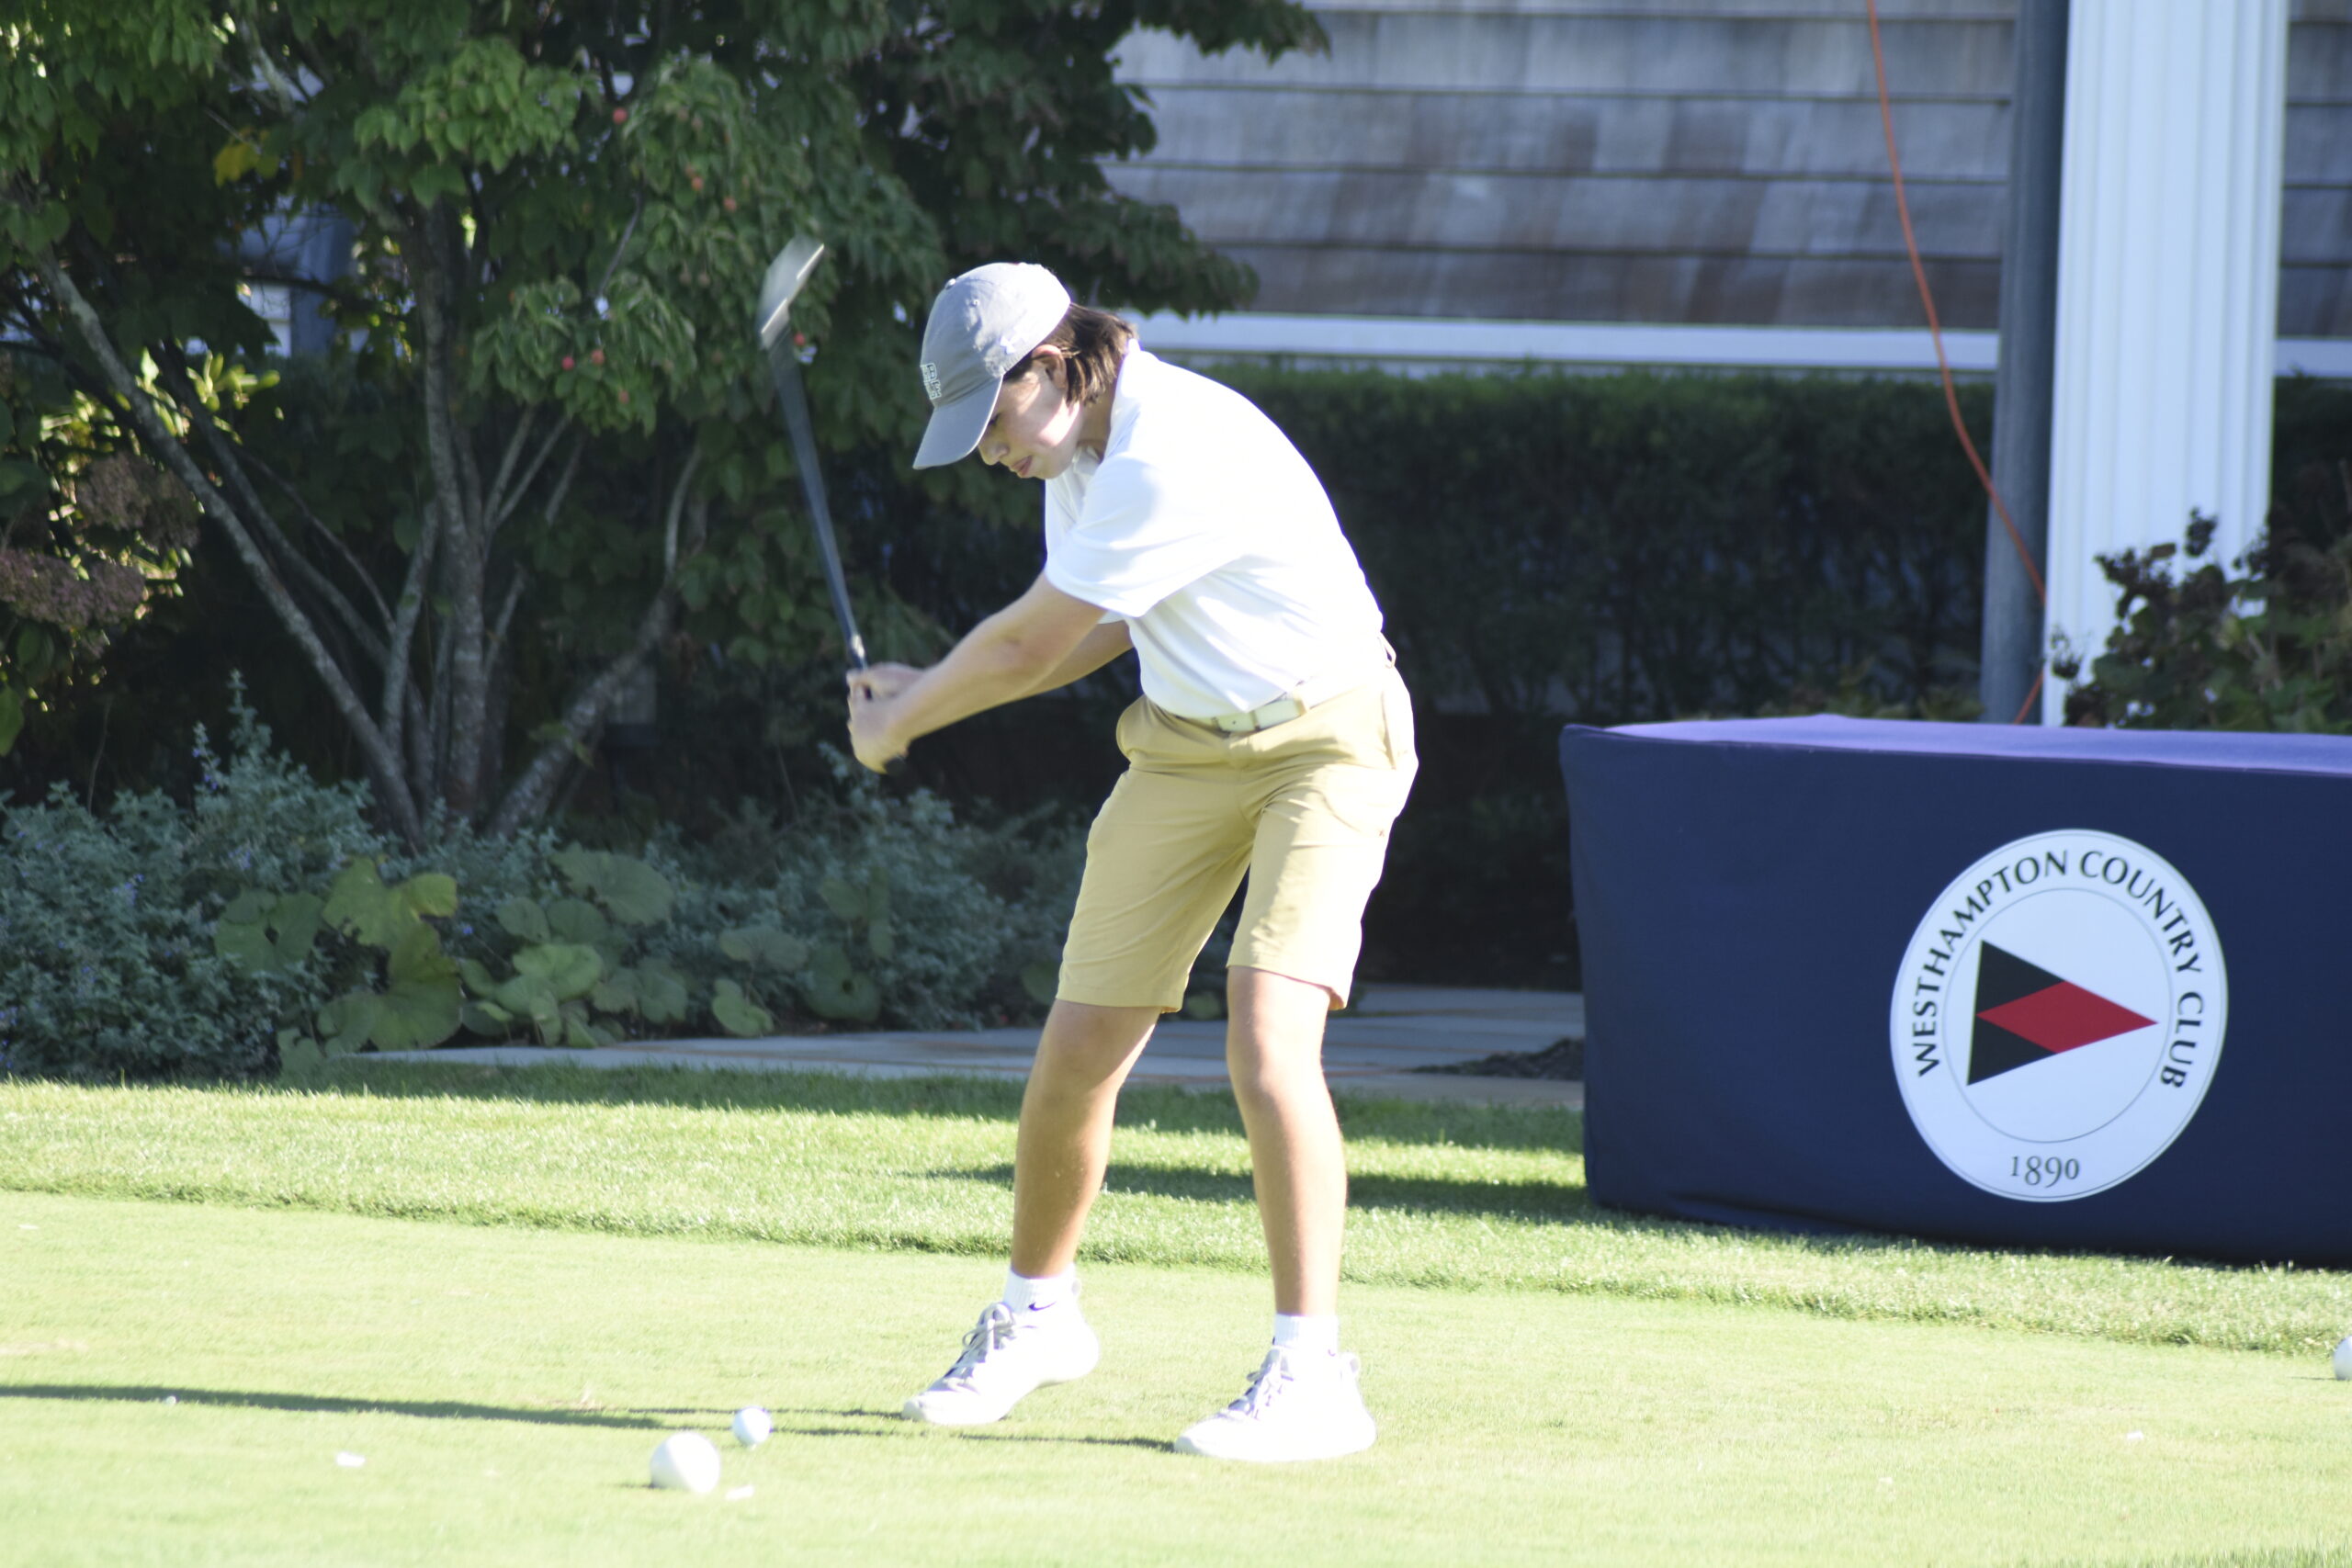 Zach Berger of Westhampton Beach was the first to tee off when the Hurricanes hosted East Hampton at Westhampton Country Club on September 15.   DREW BUDD